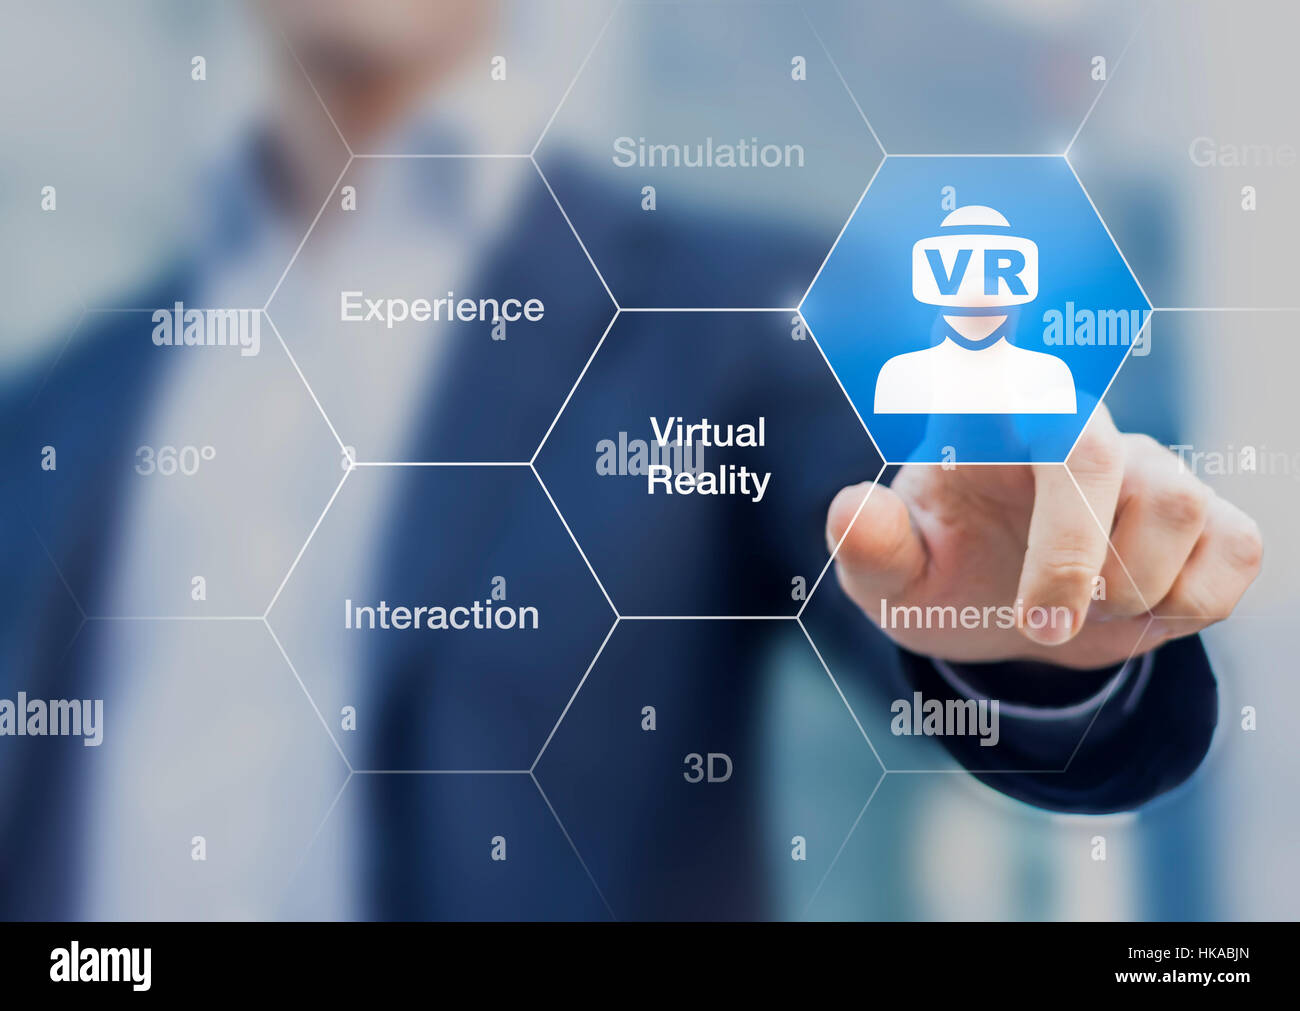 Virtual reality concept with icon of VR headset on a digital interface and a businessman touching a button Stock Photo